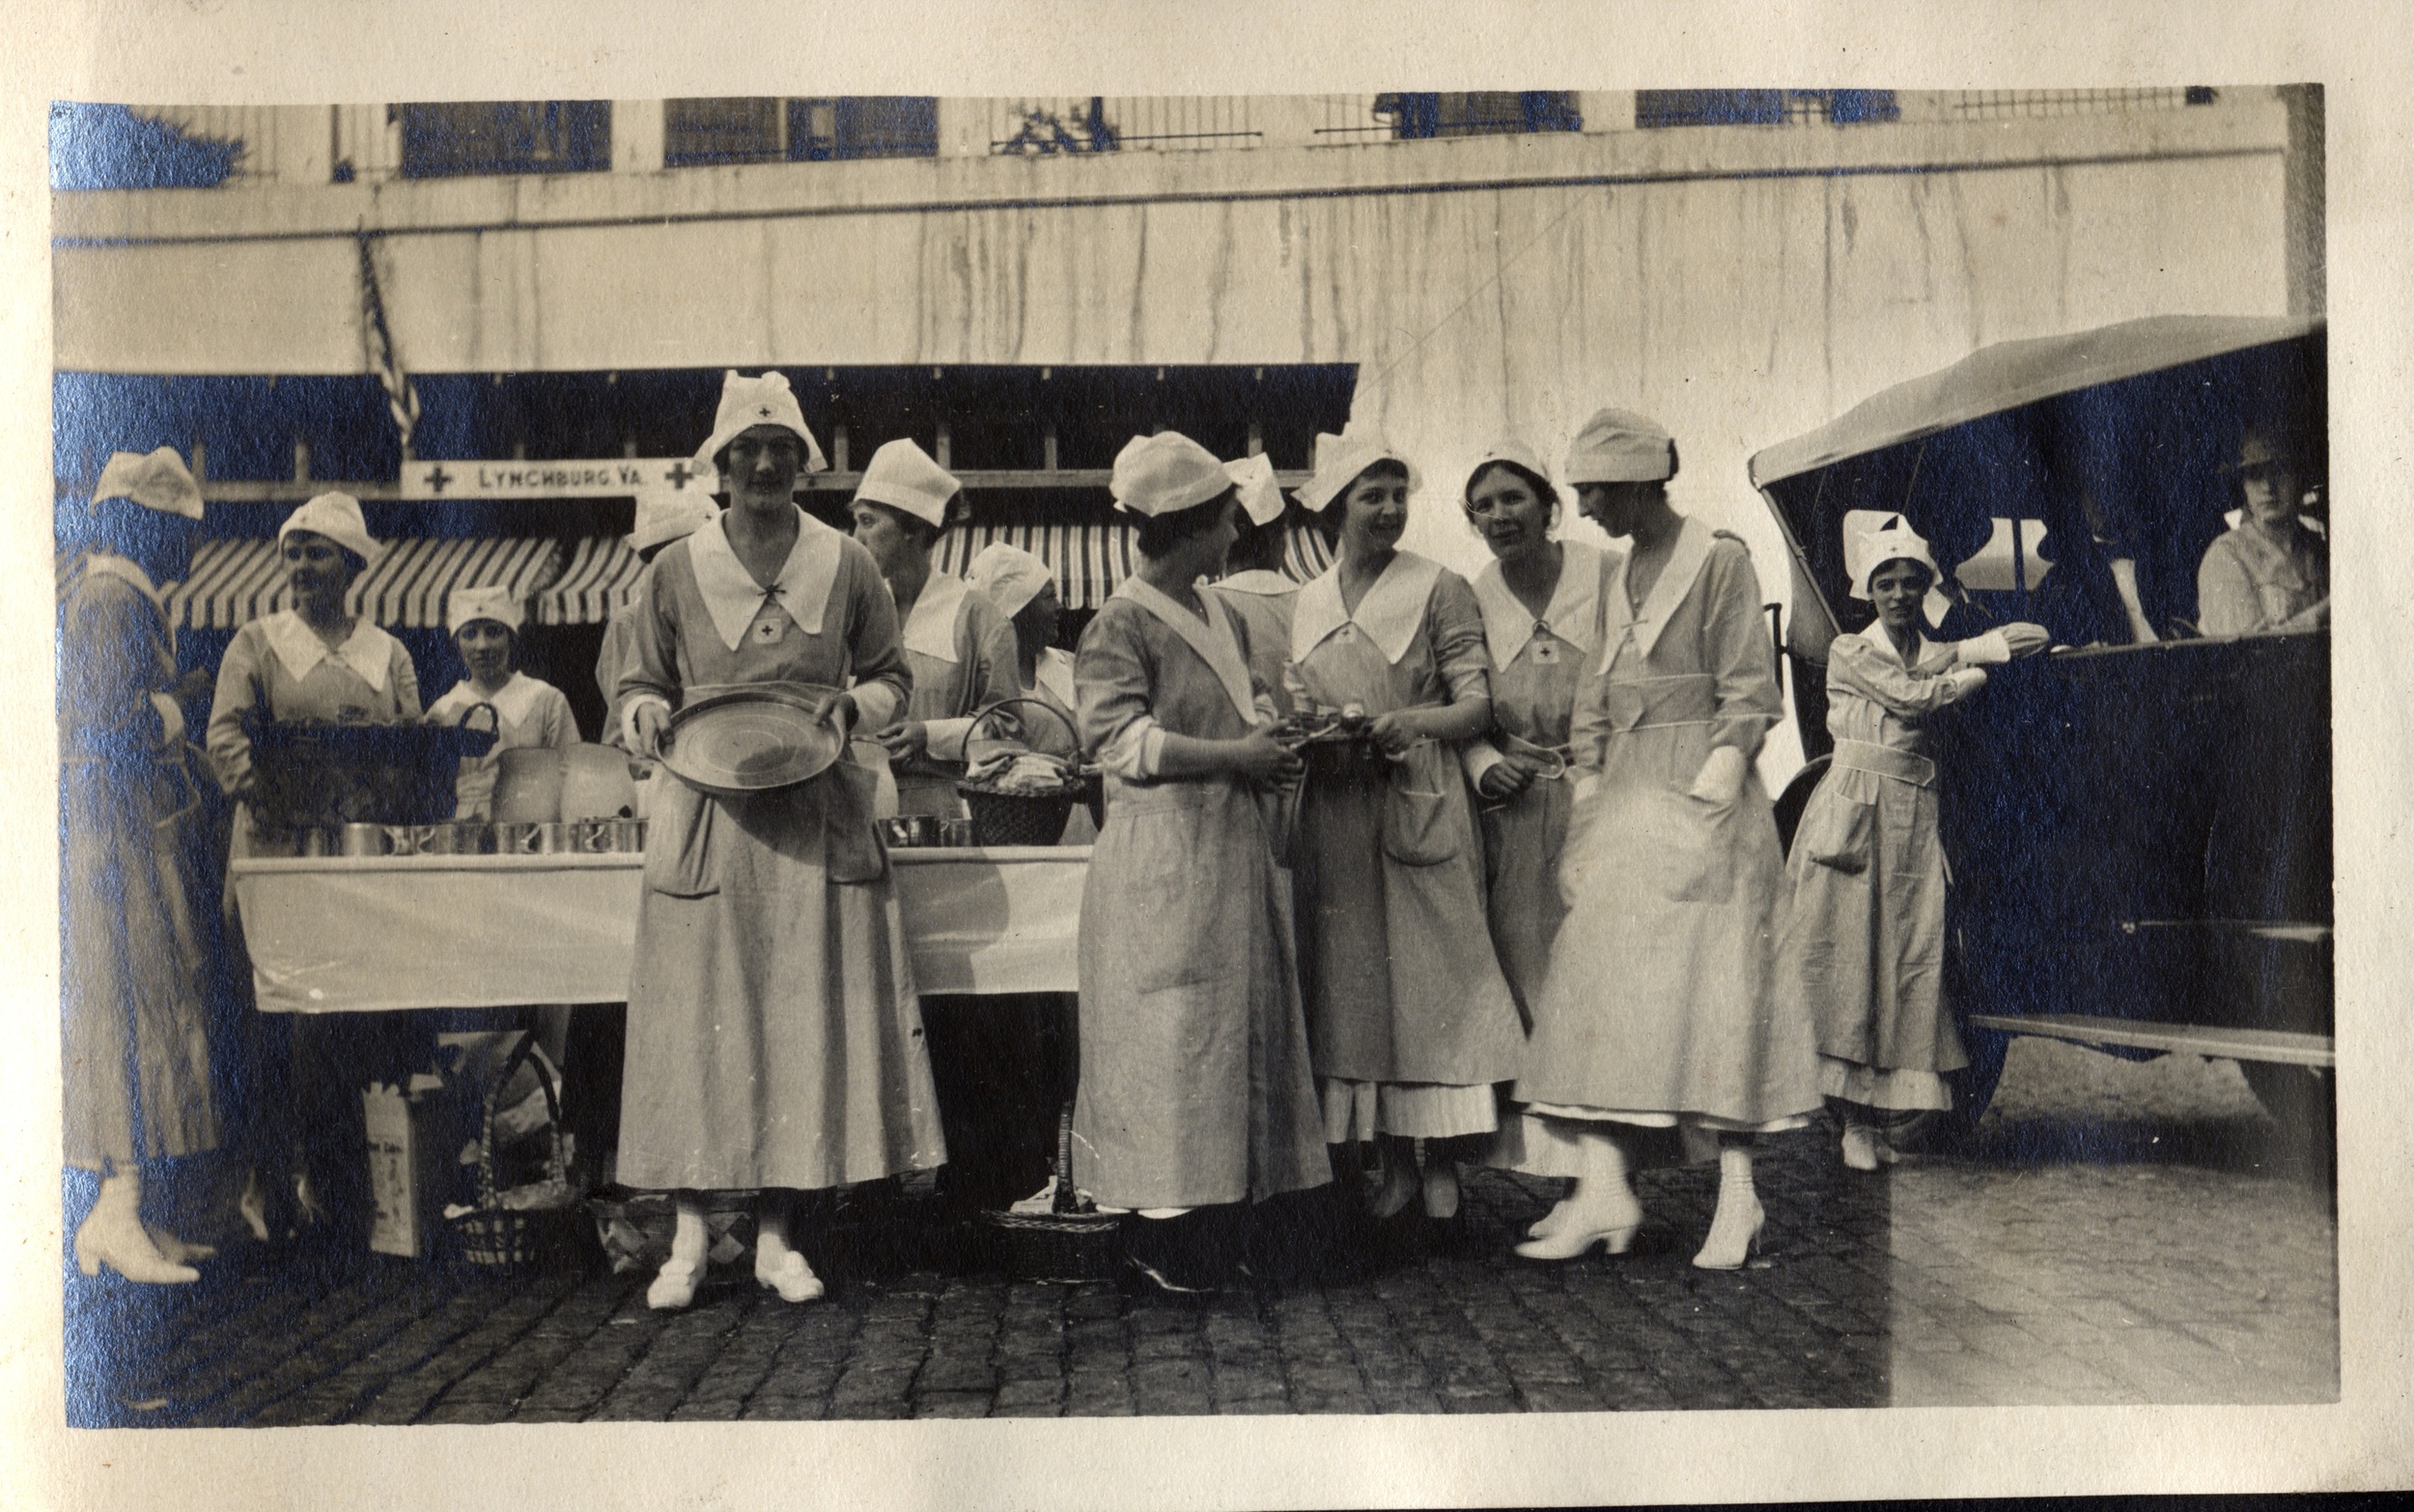 Canteen Workers with Pots & Pans, 1918-19